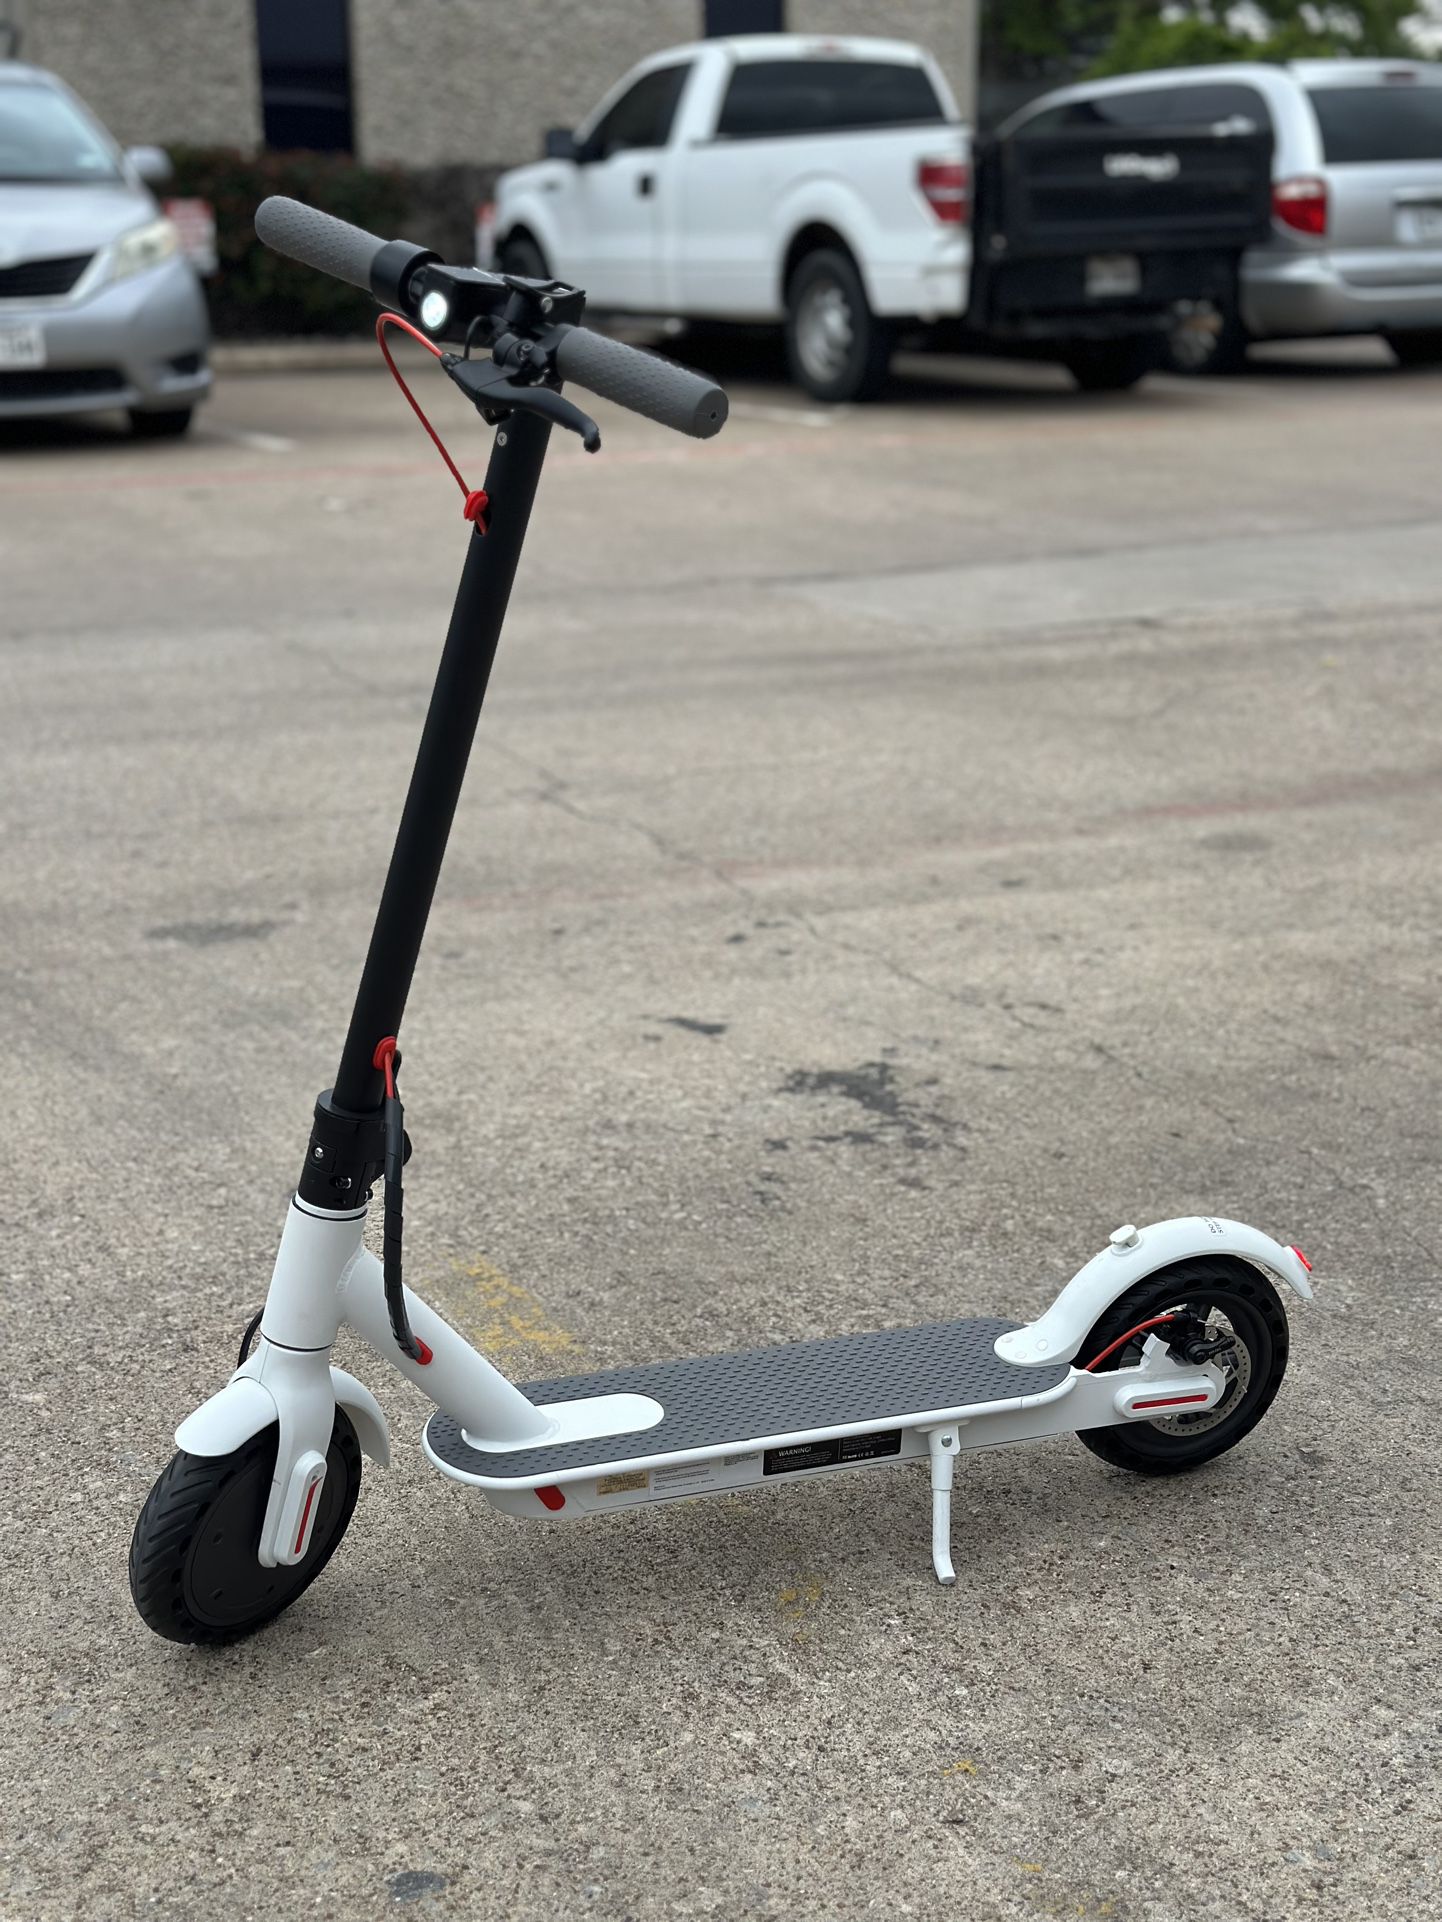 Scooting in Style: 36 V Electric Stand-Up Scooter